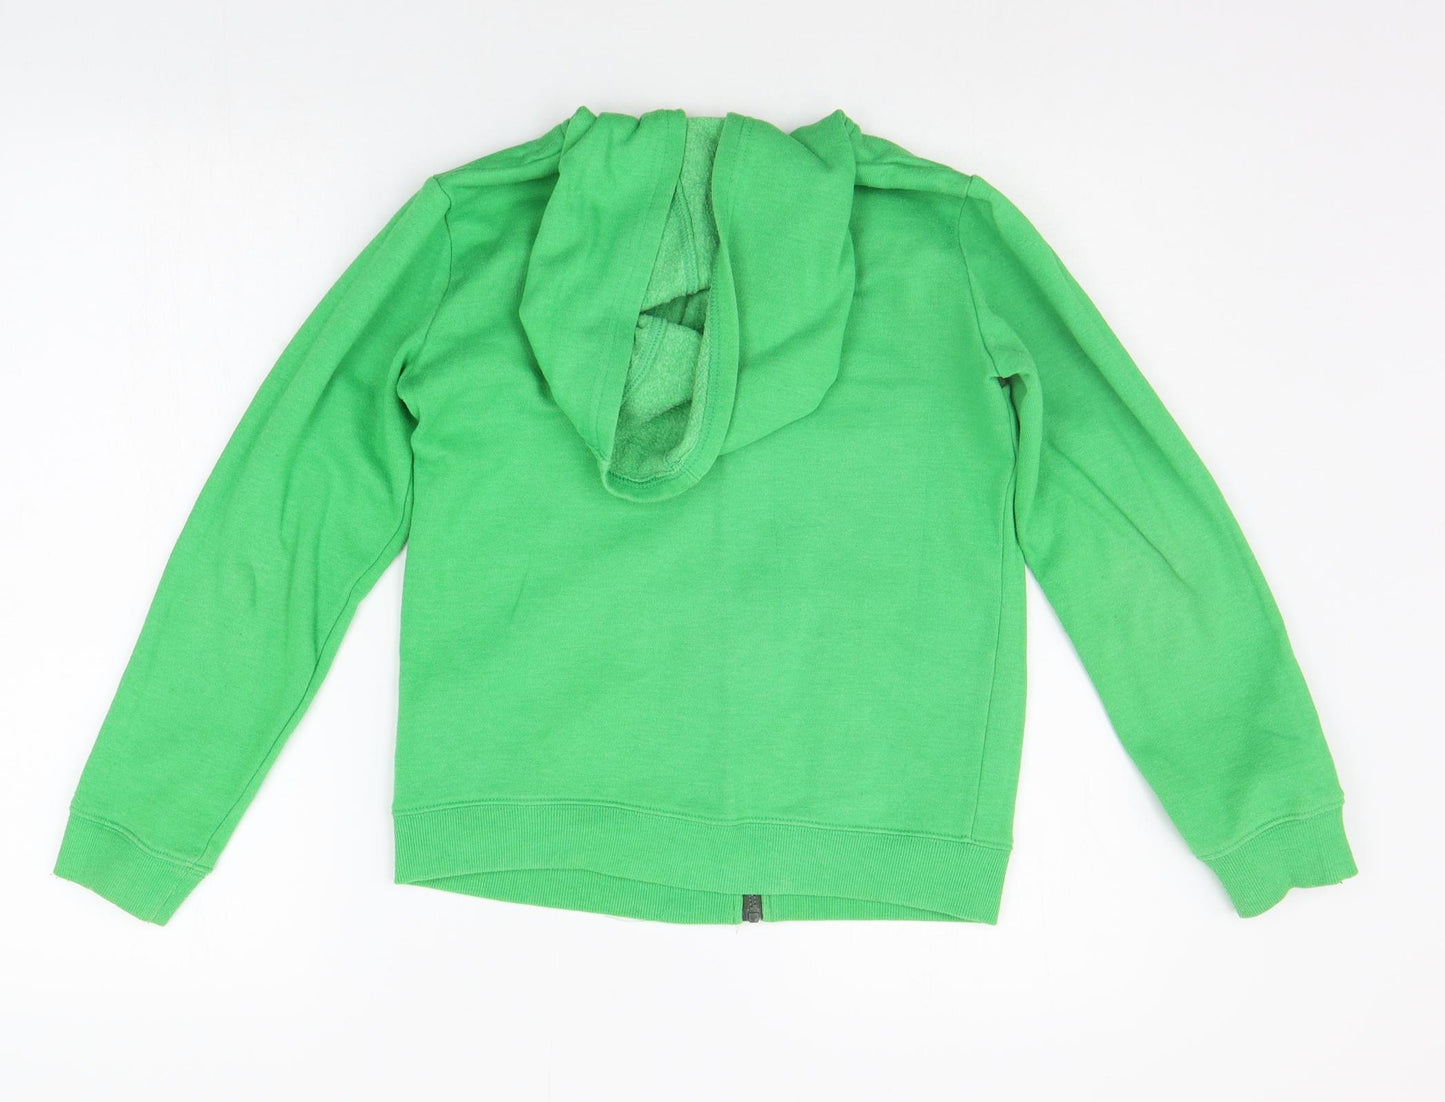 moutain warehouse Girls Green   Jacket  Size 11-12 Years